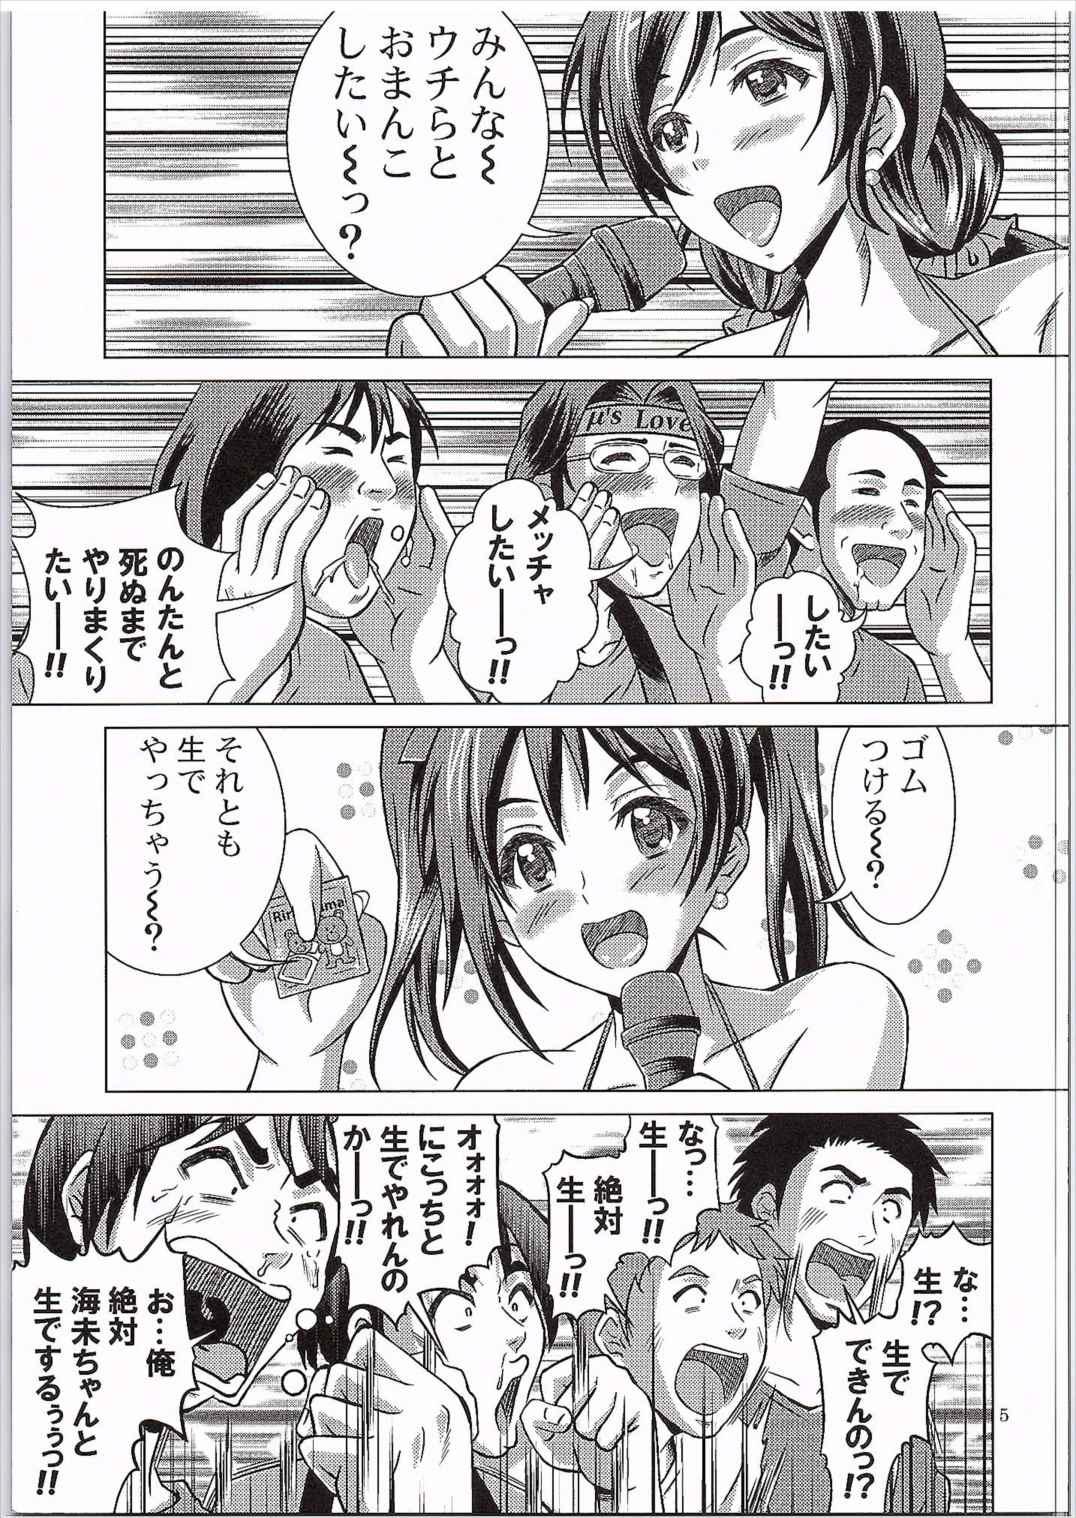 Eating Pussy Bakobako Live! - Love live Mulher - Page 4